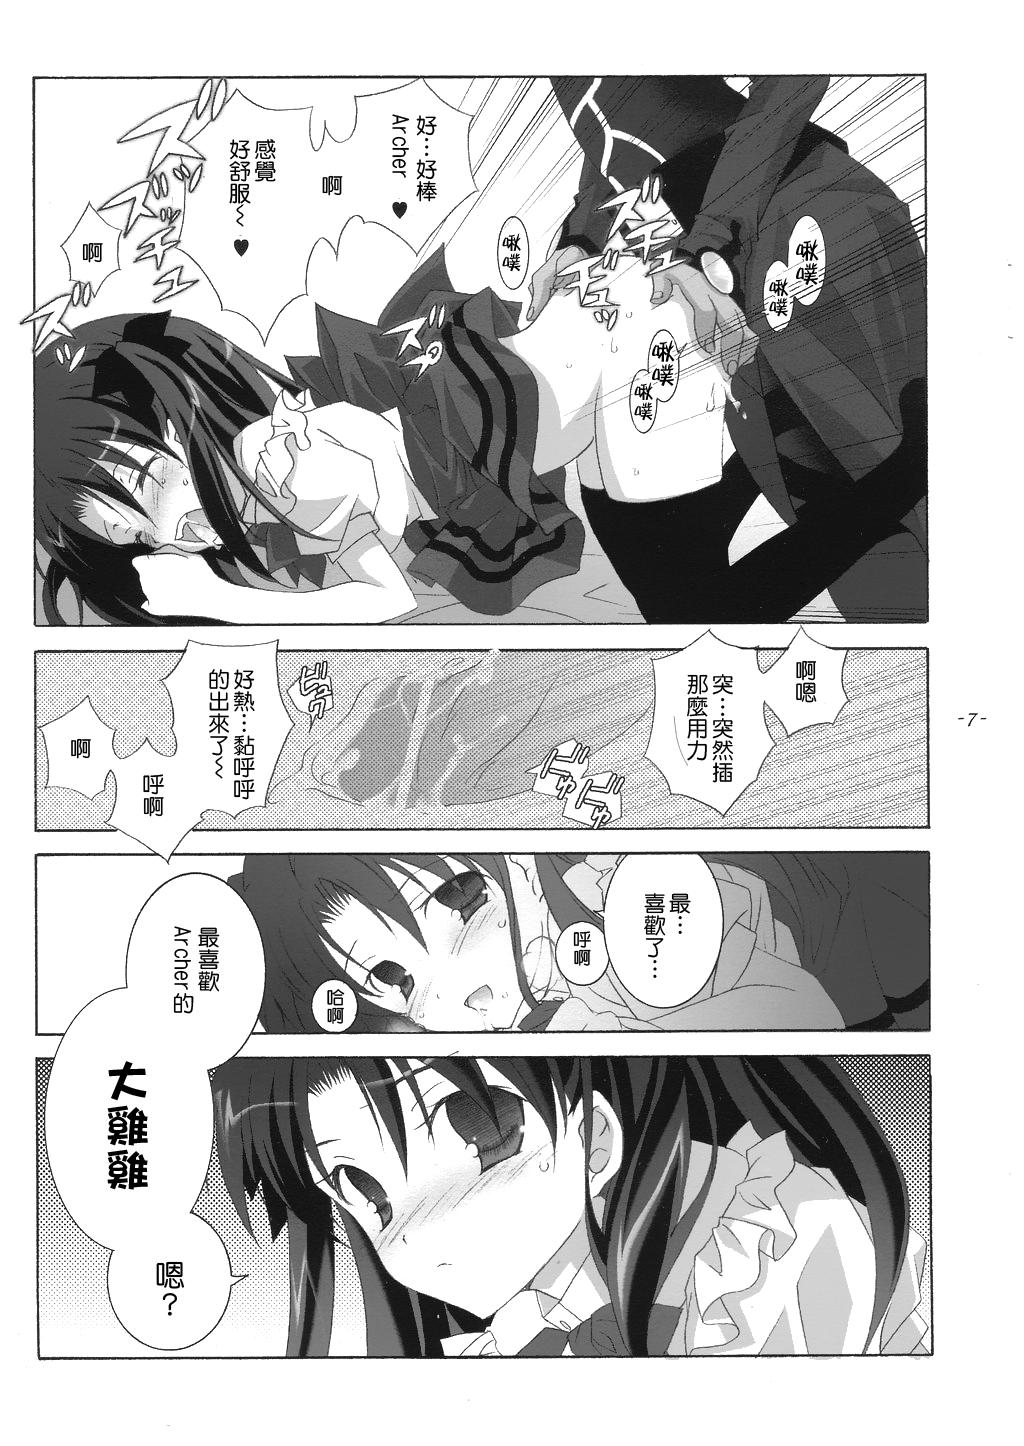 Bhabi Cute Honey - Fate stay night Barely 18 Porn - Page 6